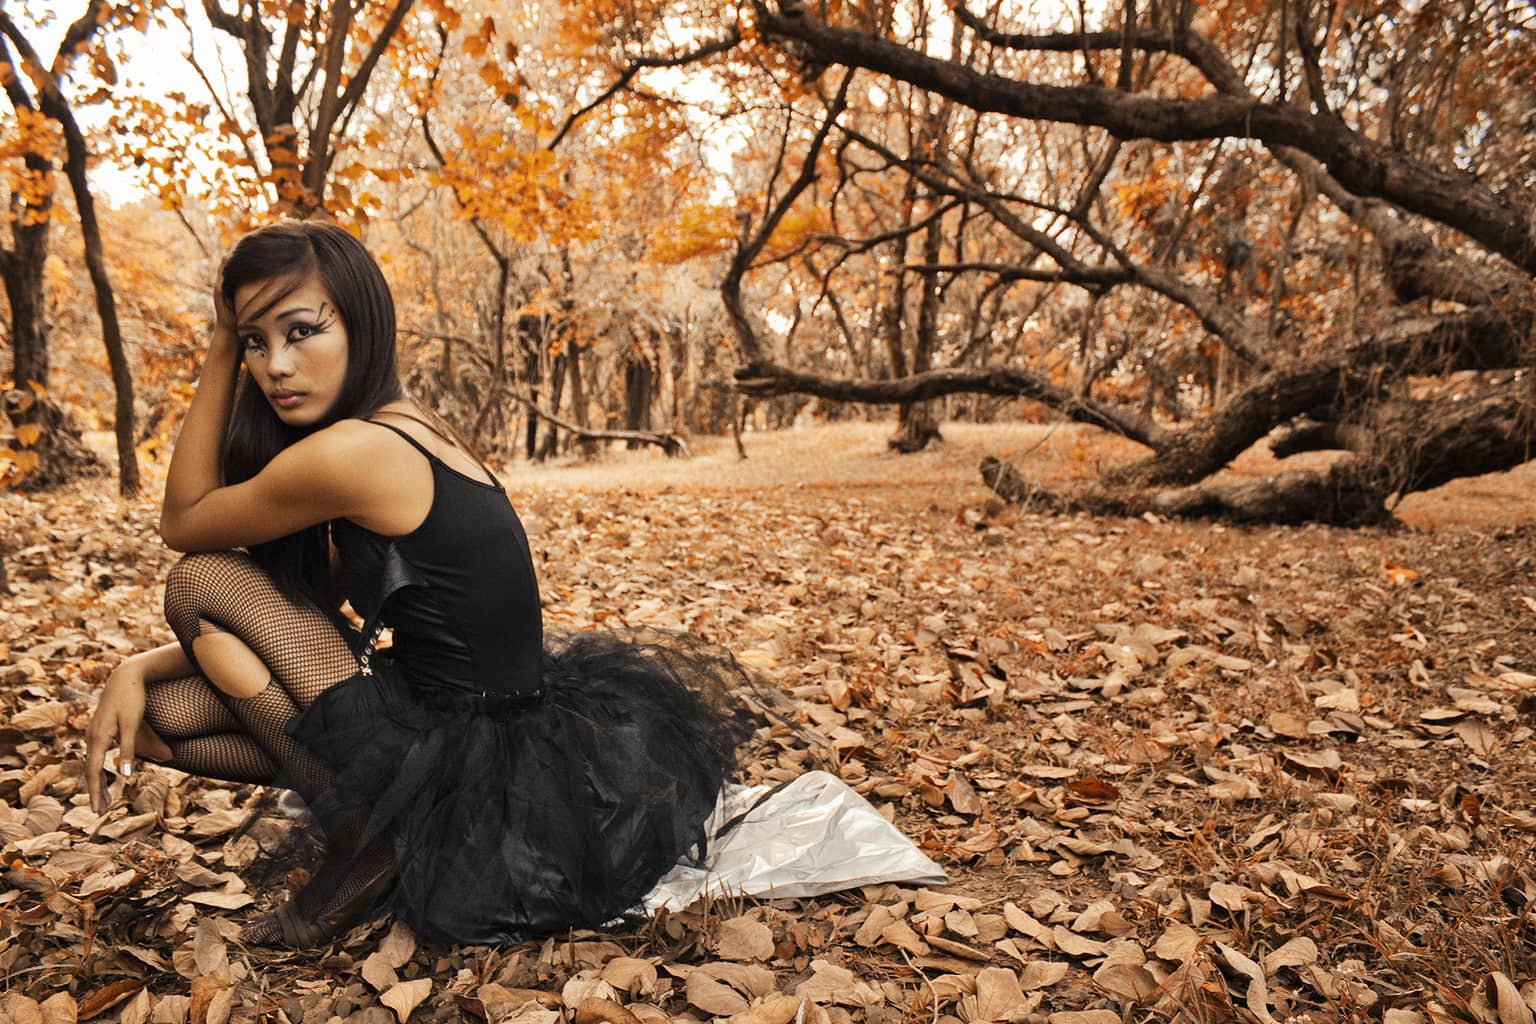 Halloween outfit - picture of a girl wearing a black ballerina outfit outside in the woods